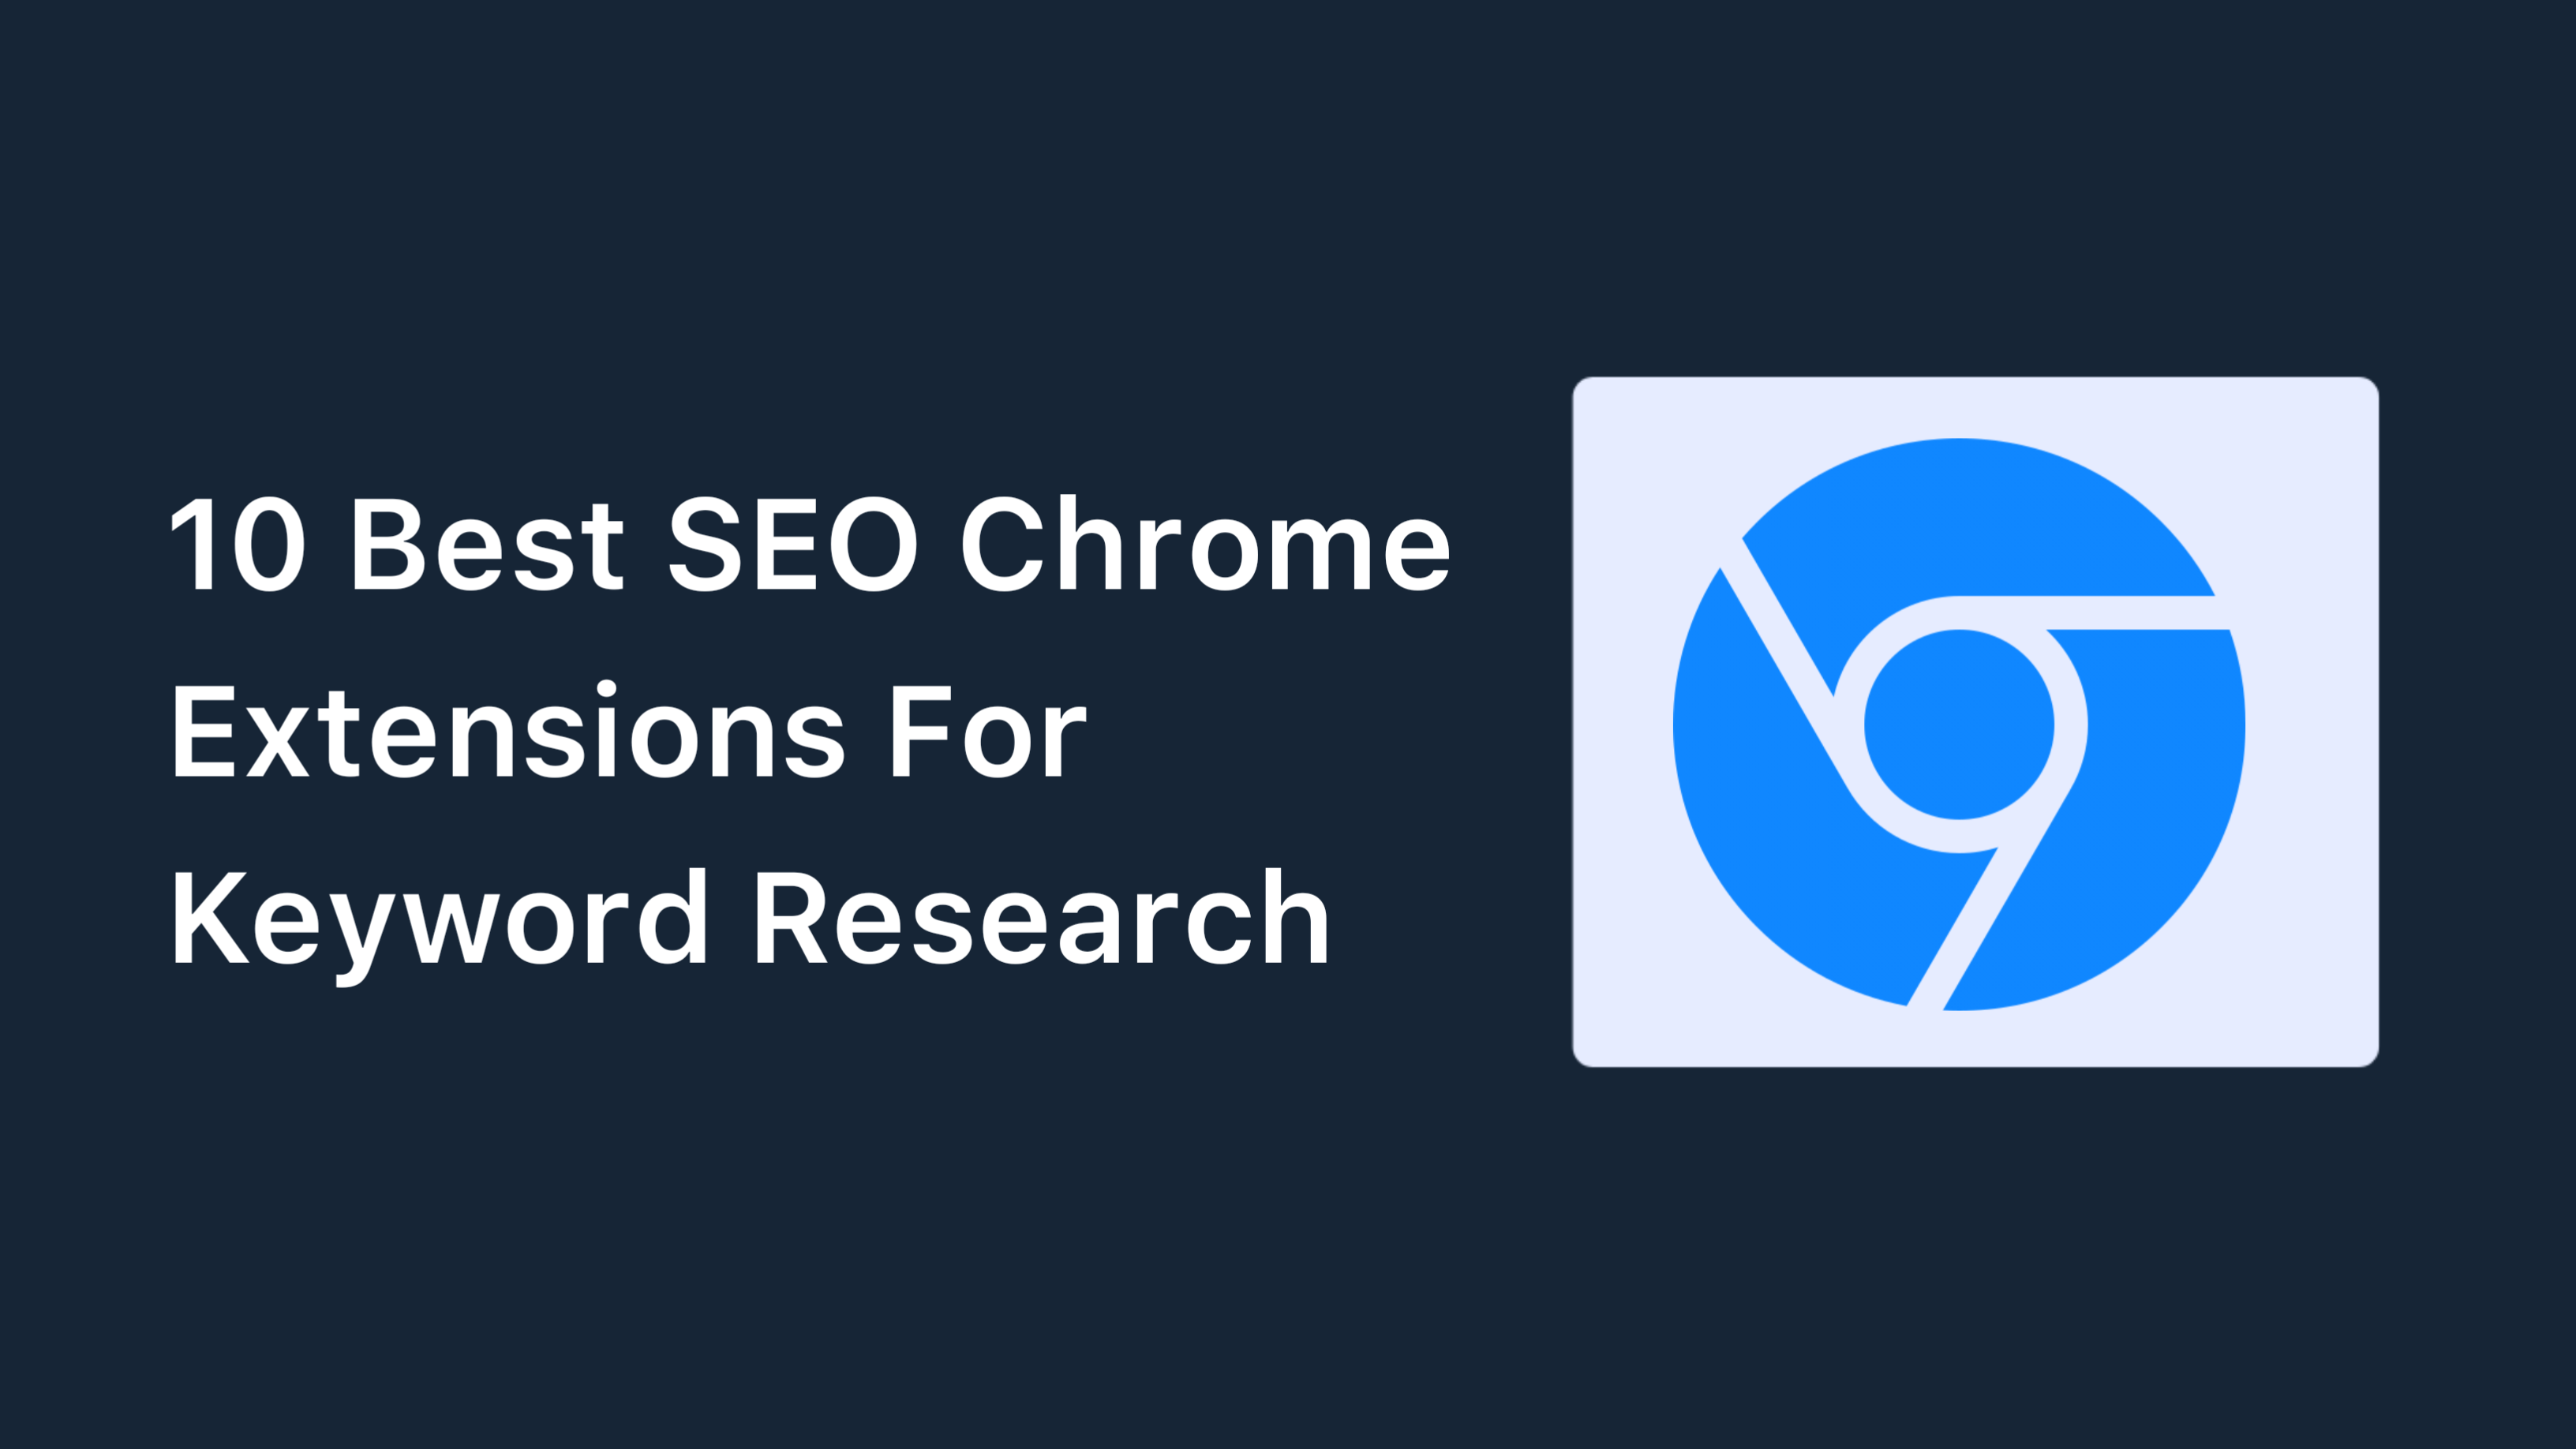 10 Best SEO Chrome Extensions For Keyword Research